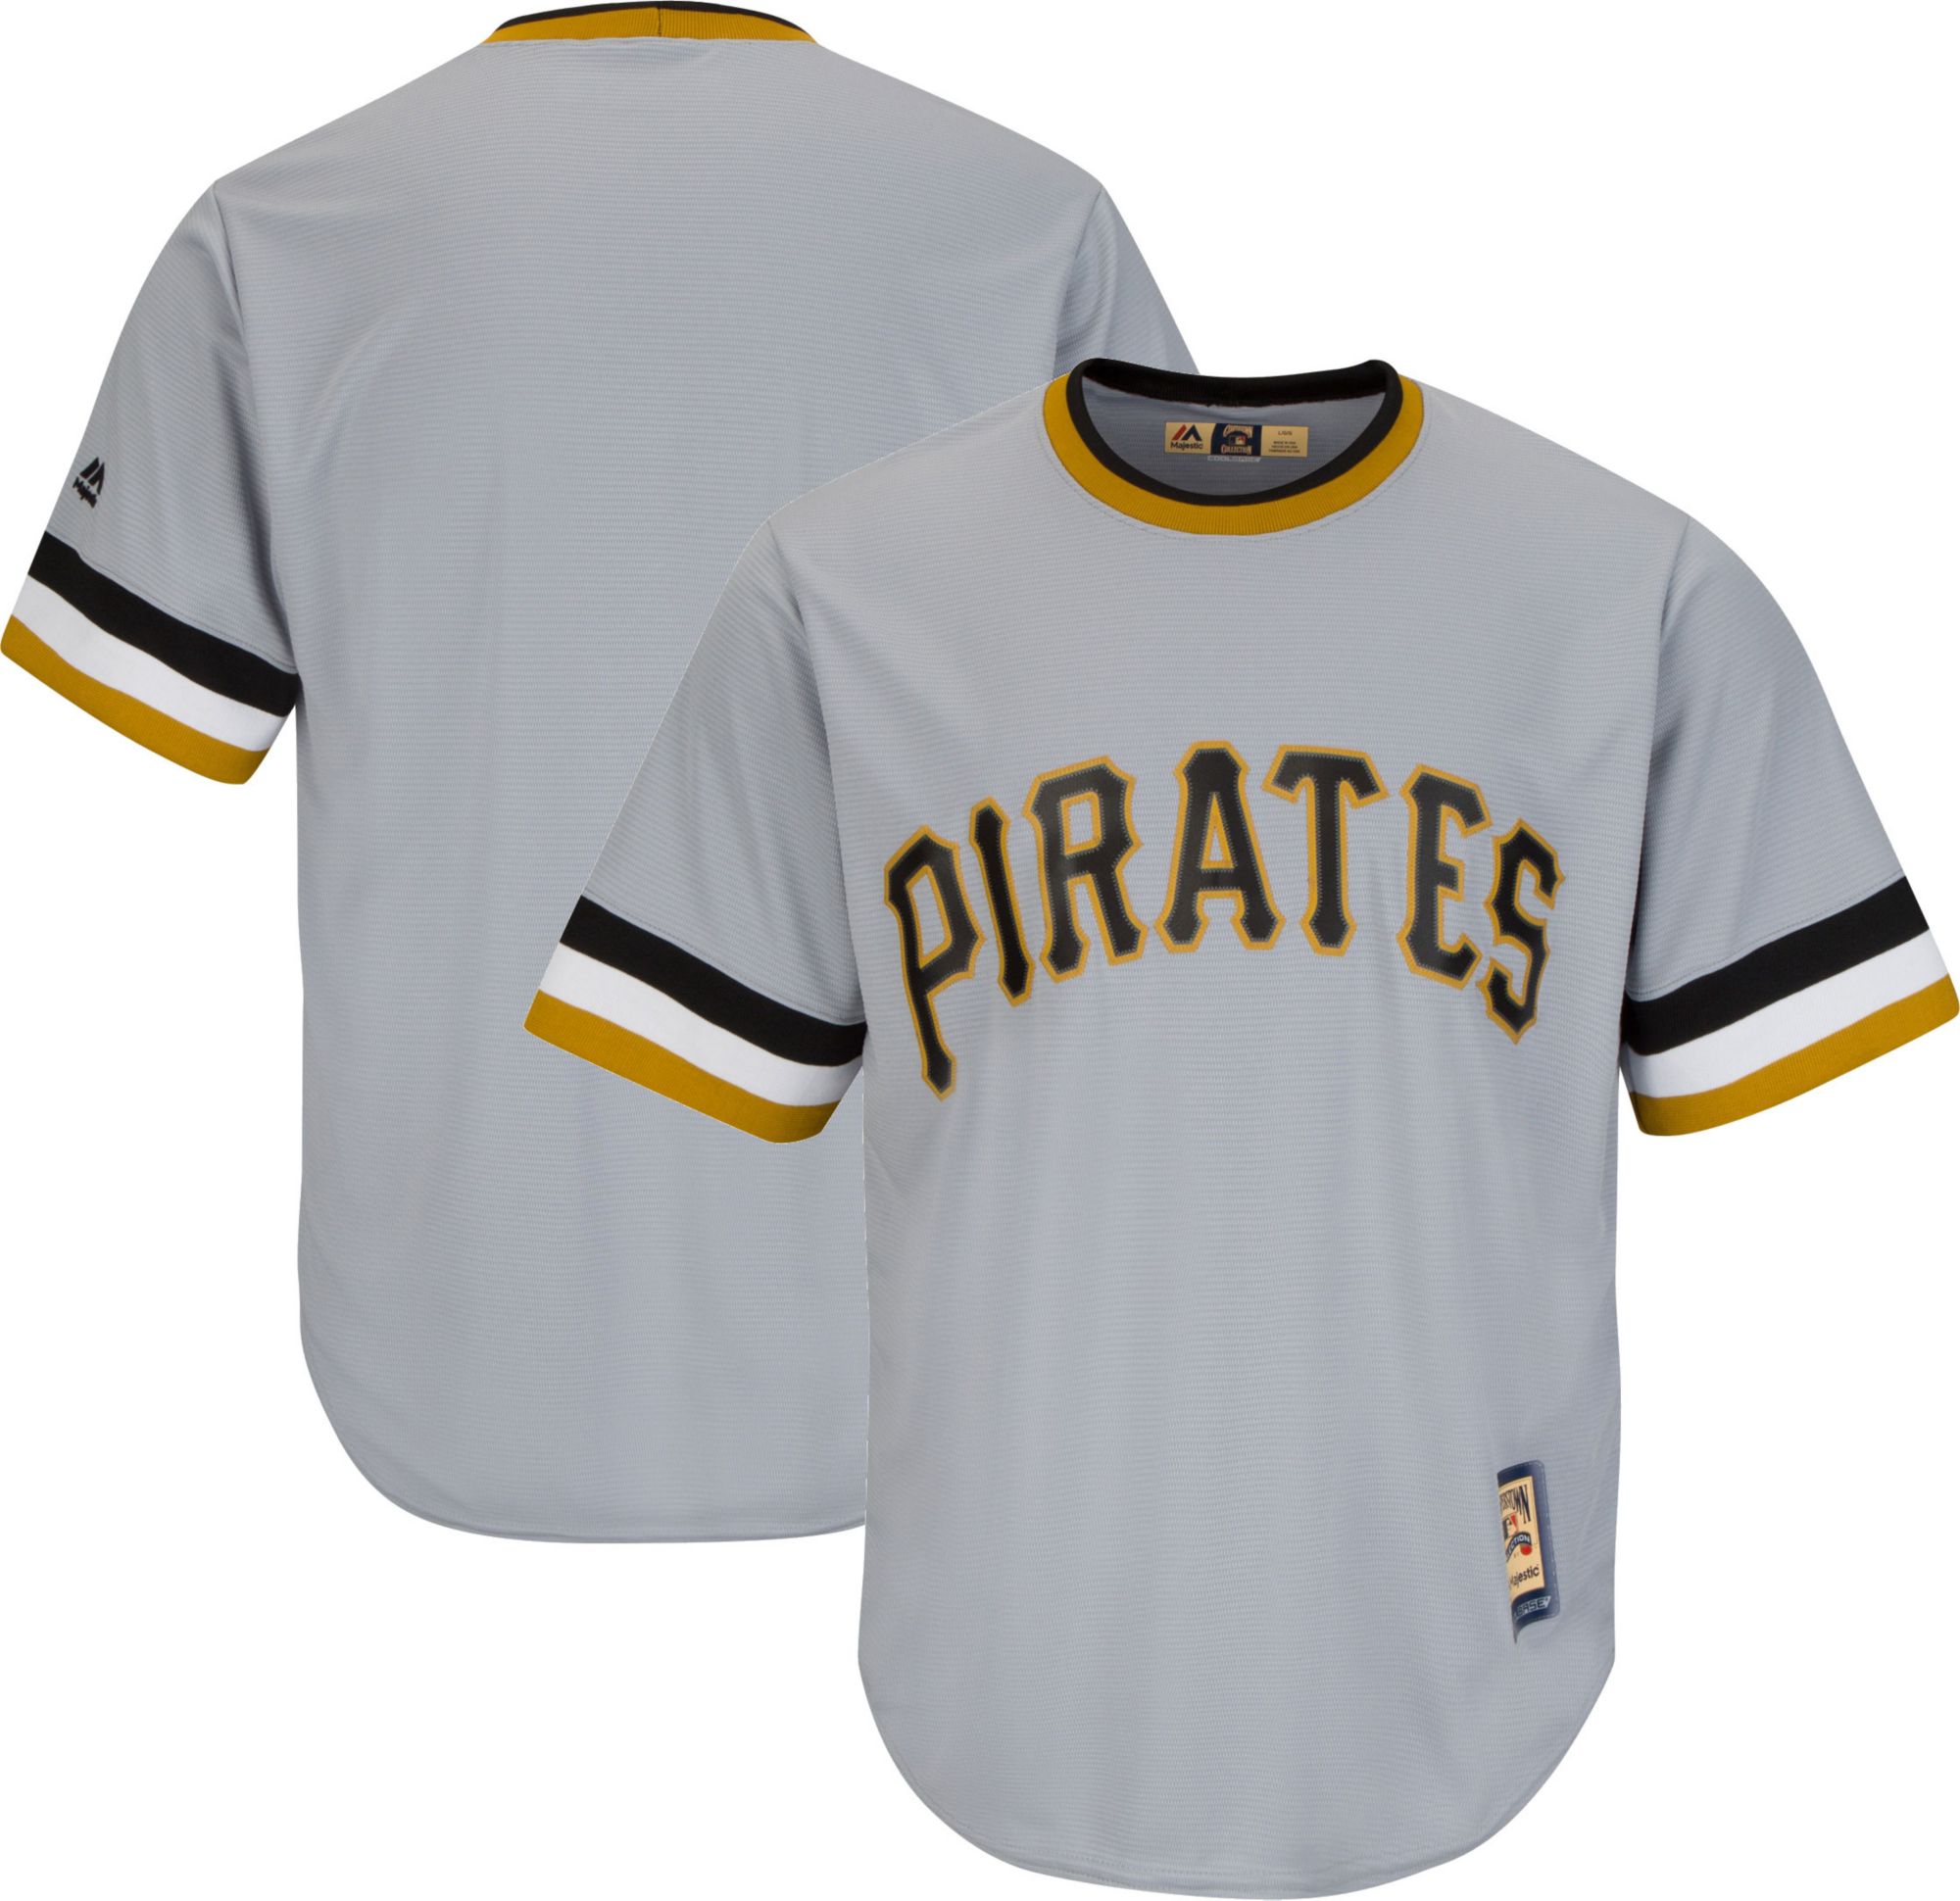 pirates grey jersey Online Shopping for 